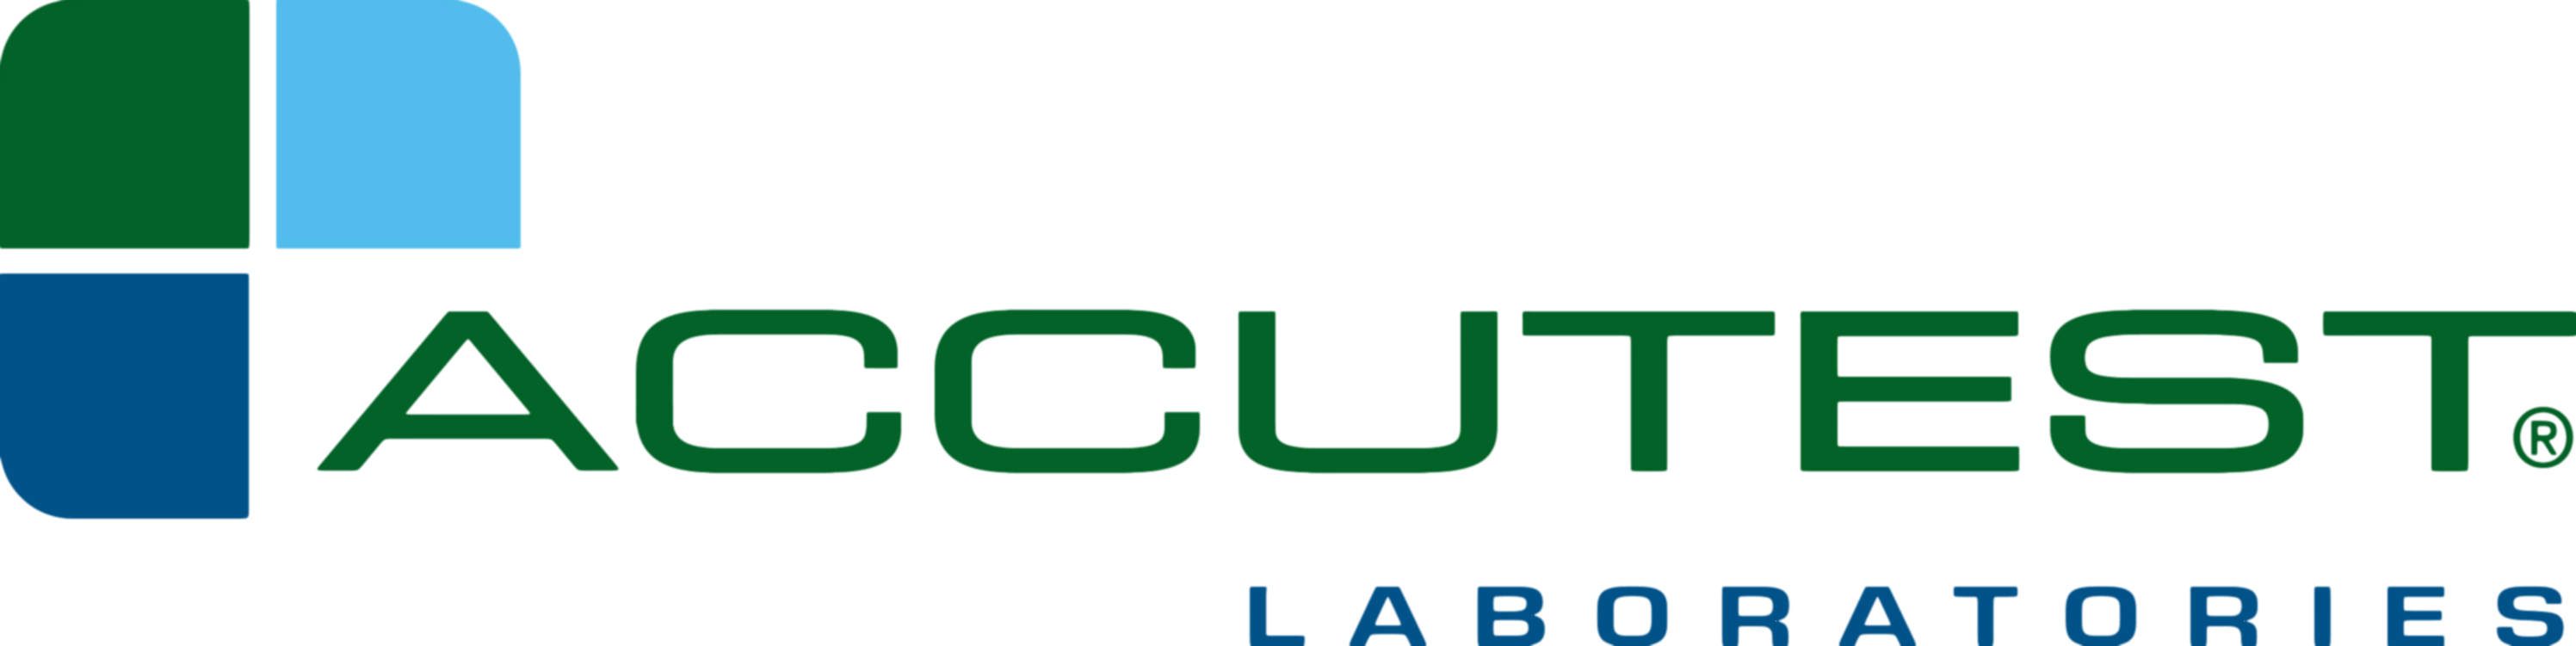 Accutest Labs Logo